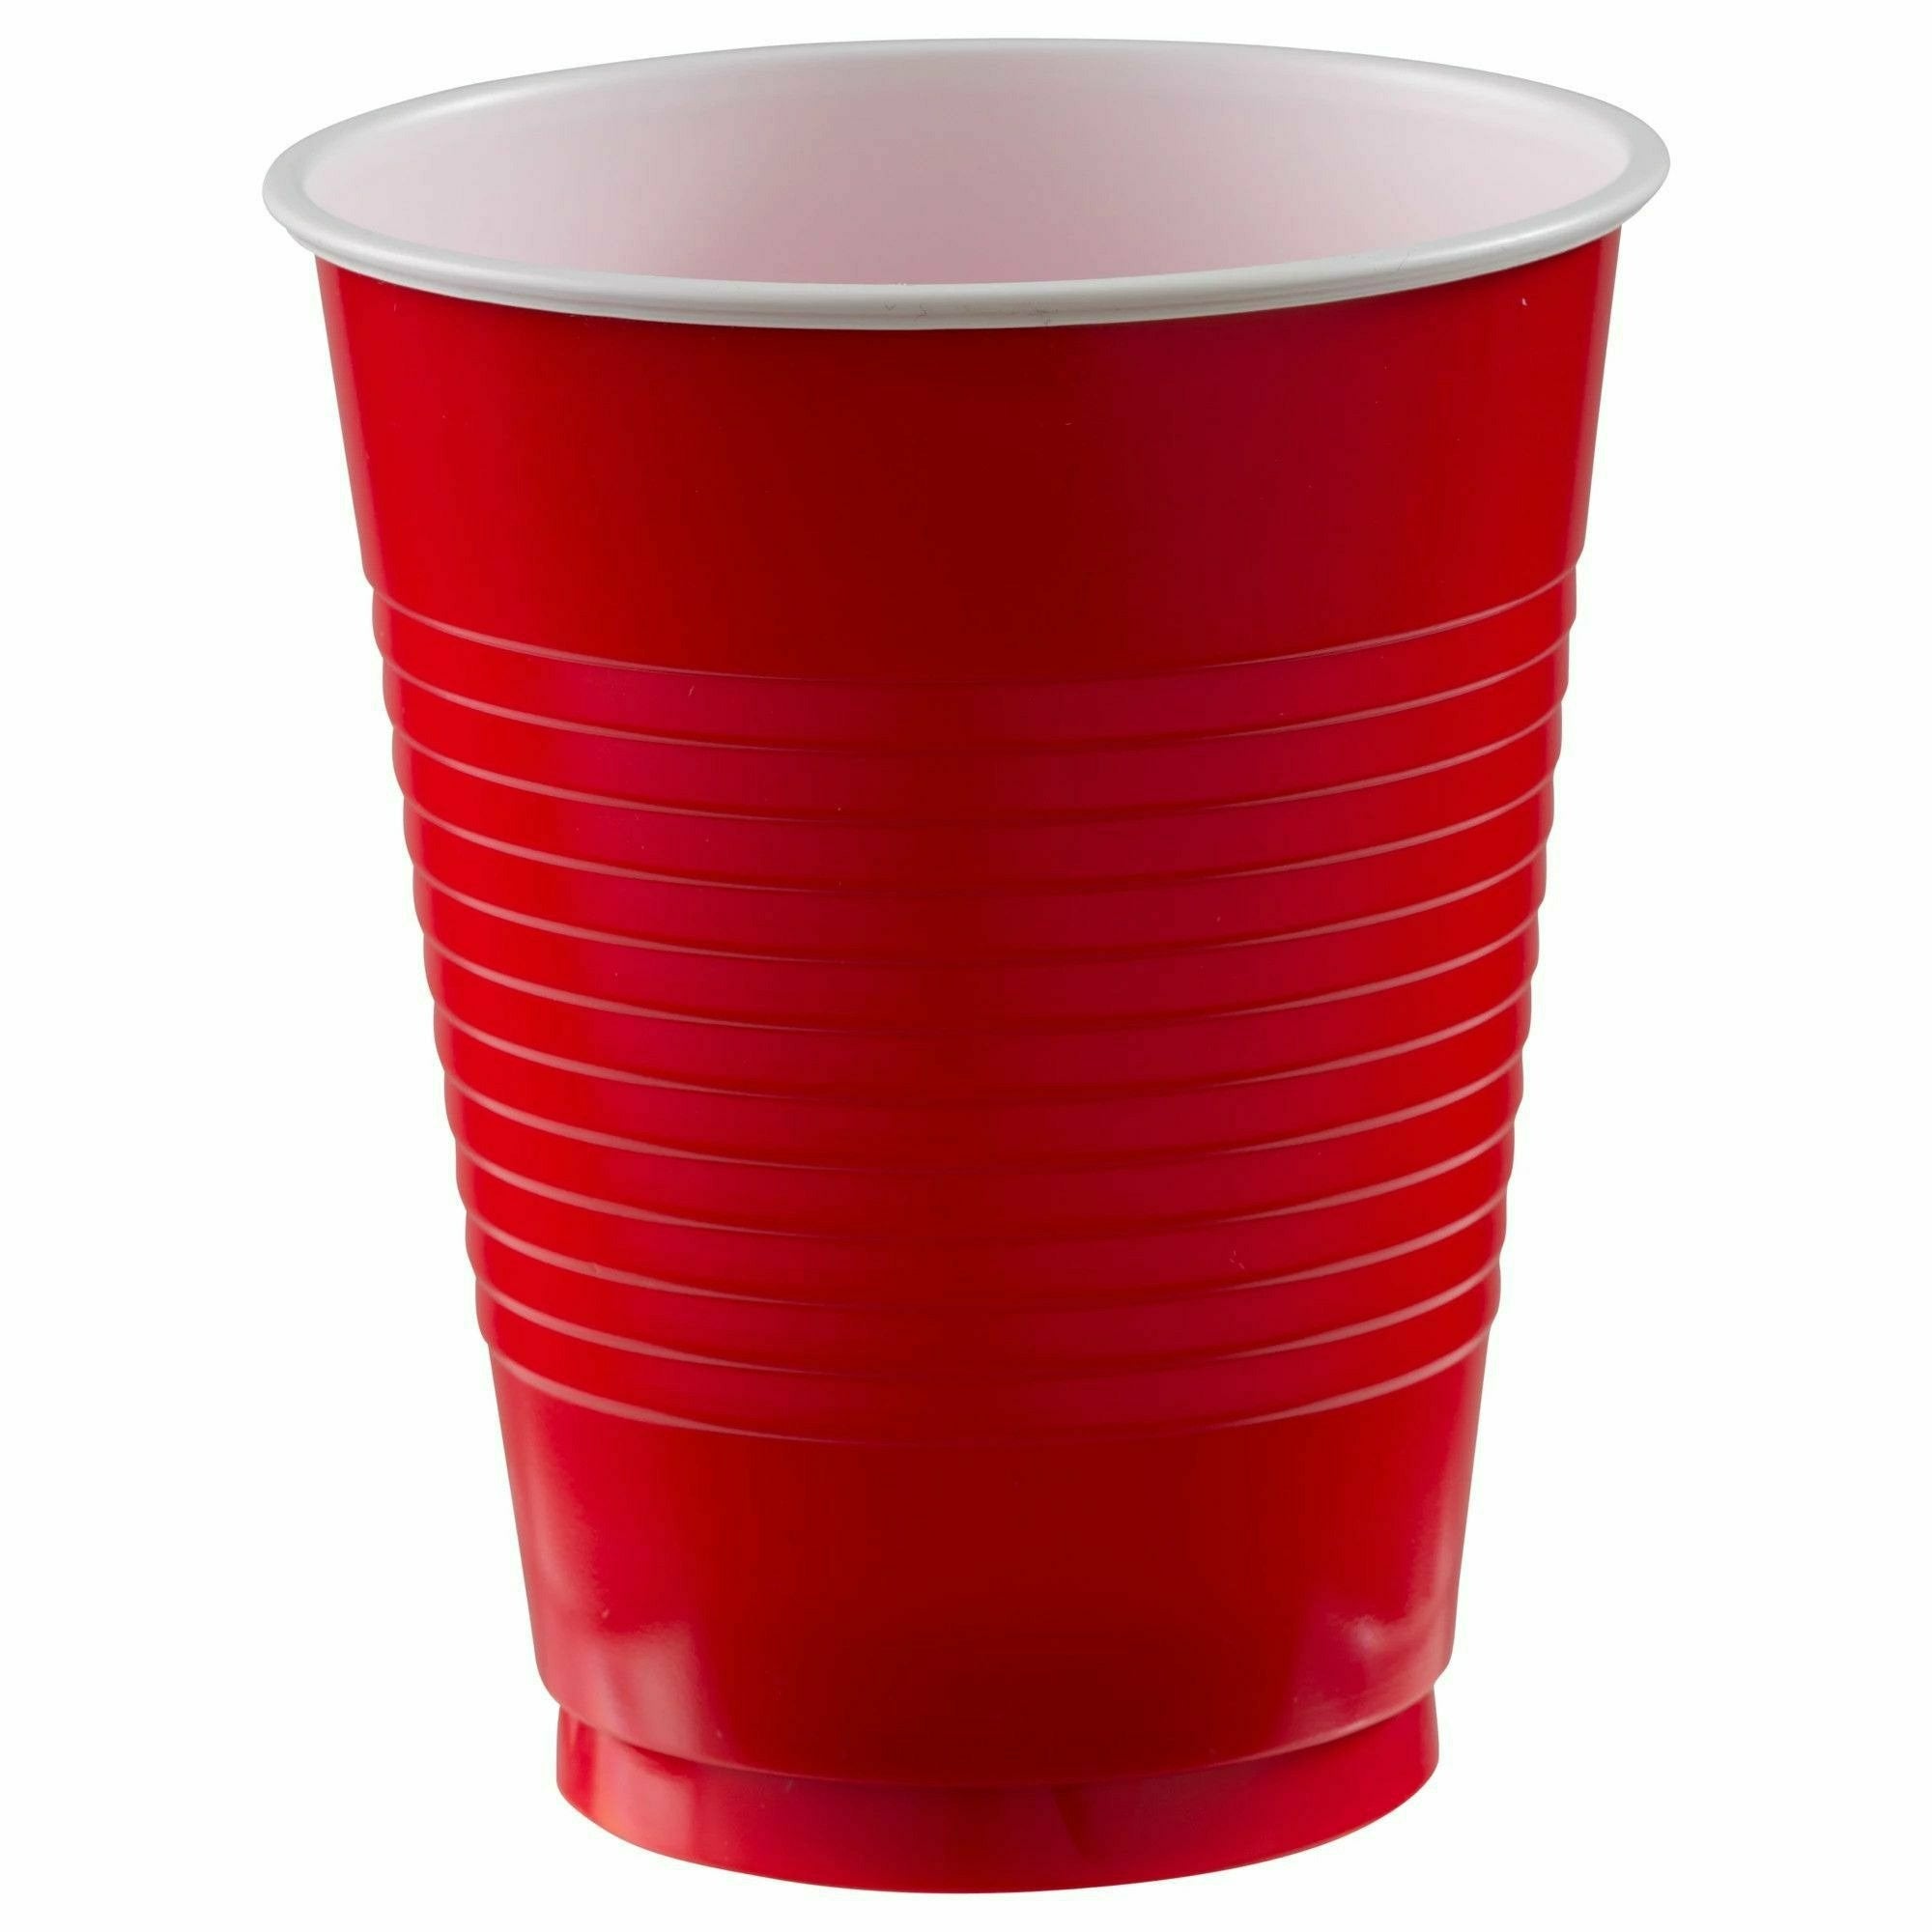 Amscan BASIC Apple Red - 18 oz. Plastic Cups, 50 Ct.